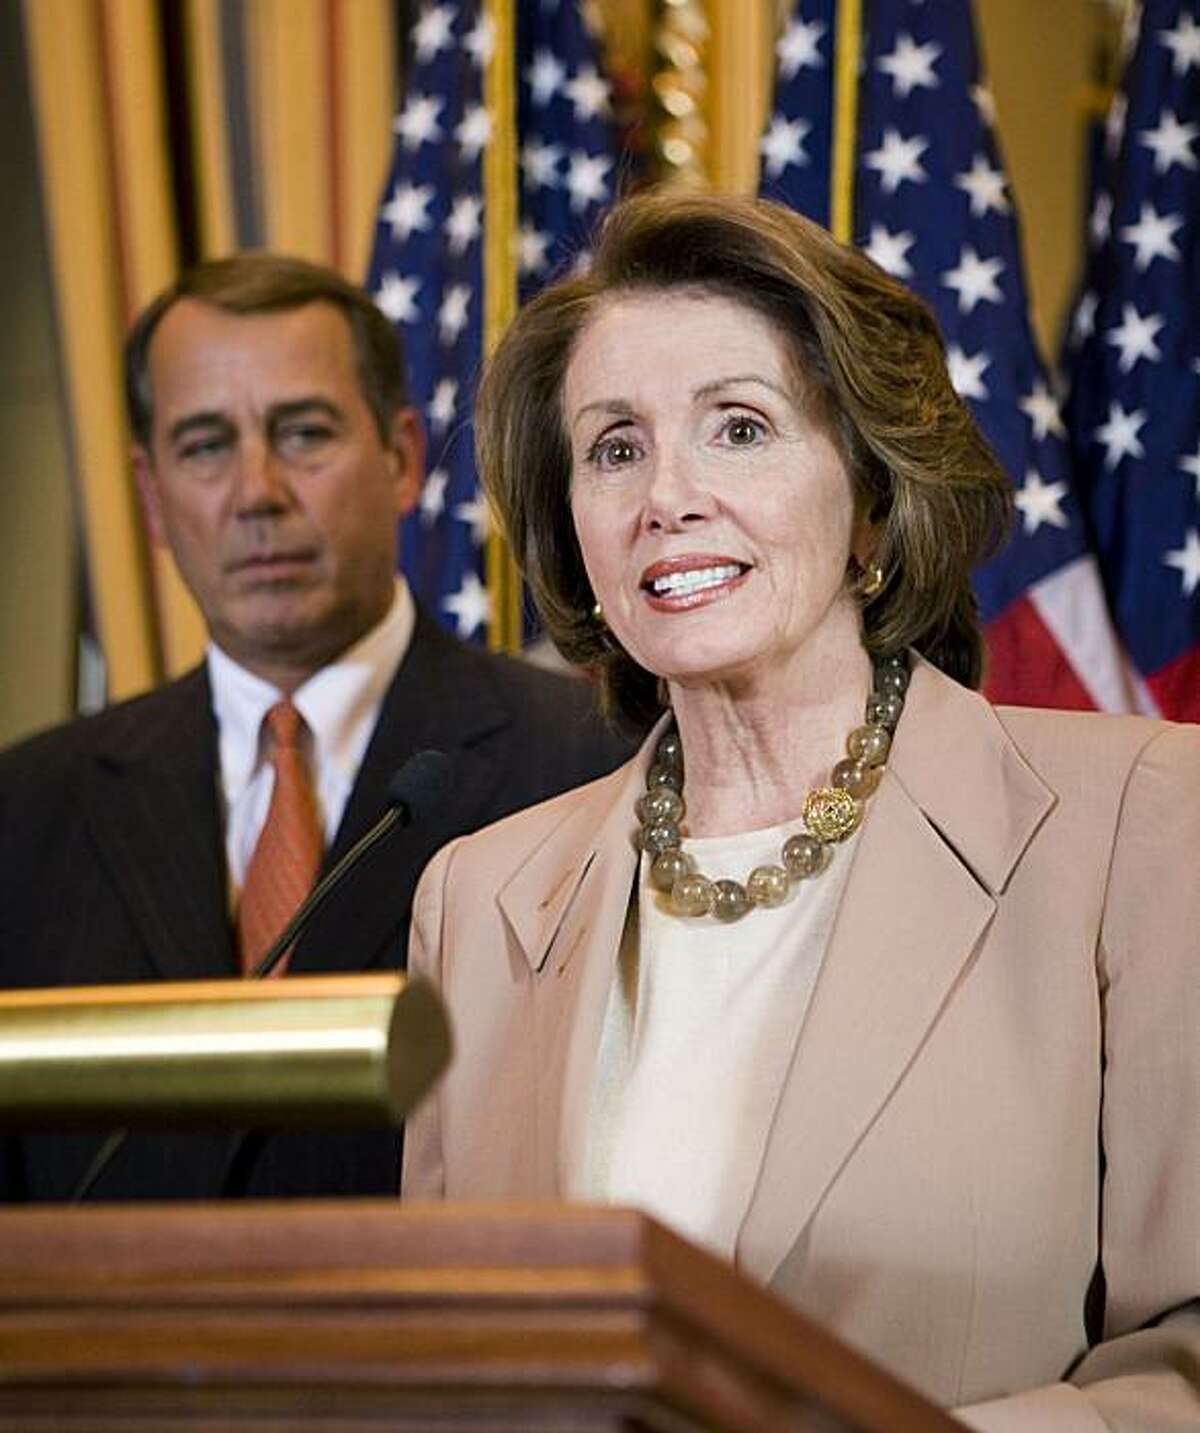 Speaker of the House Nancy Pelosi (D-CA) and House Minority Leader John Boehner (R-OH) speak at a press conference about the passage of a bipartisan economic stimulus package by the House of Representative on Capitol Hill in Washington, DC January 29, 2008. REUTERS/Joshua Roberts (UNITED STATES)